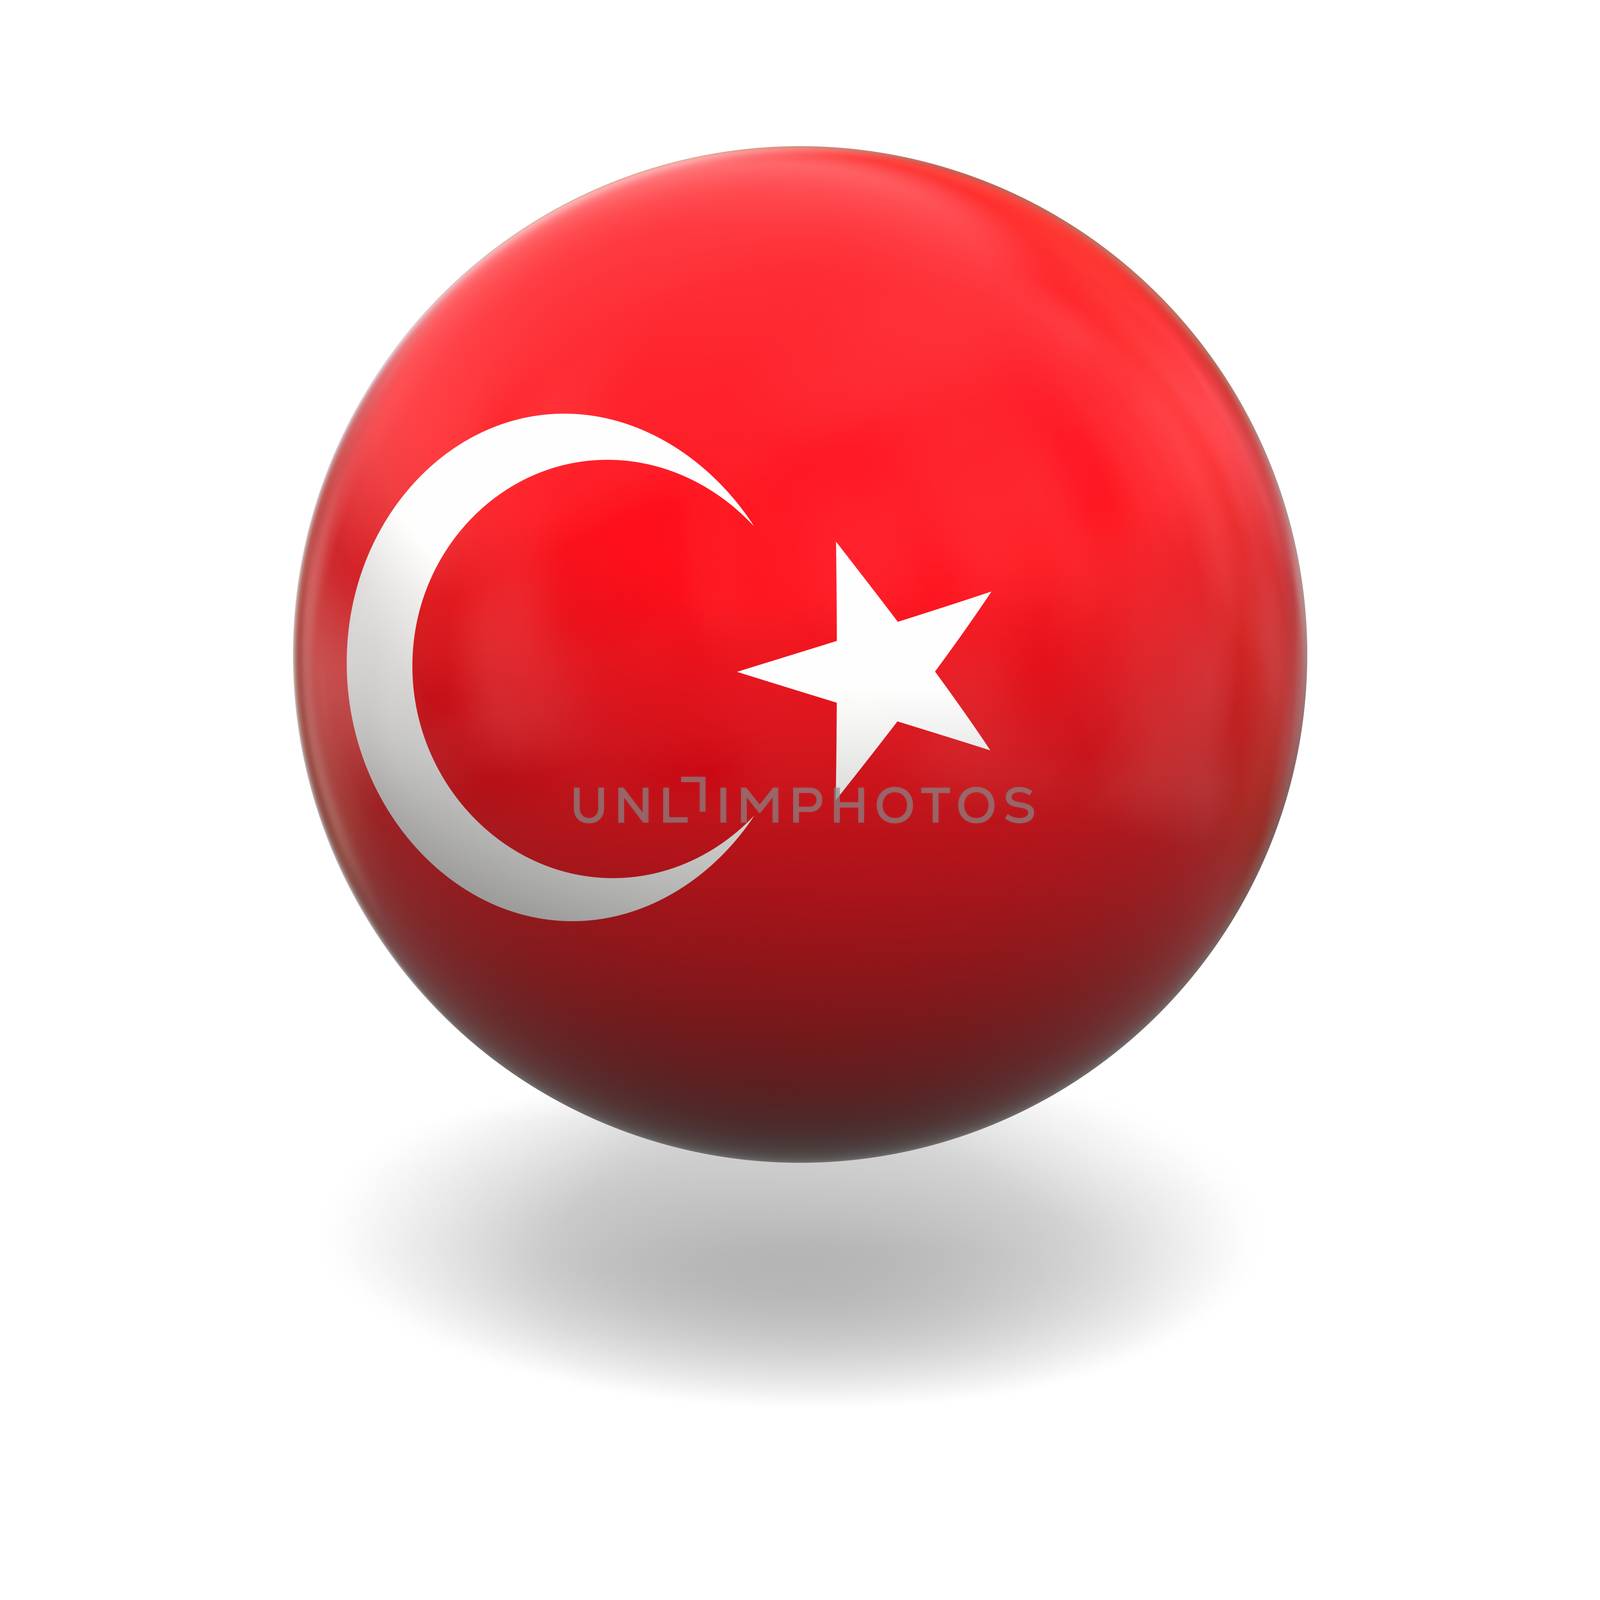 National flag of Turkey on sphere isolated on white background